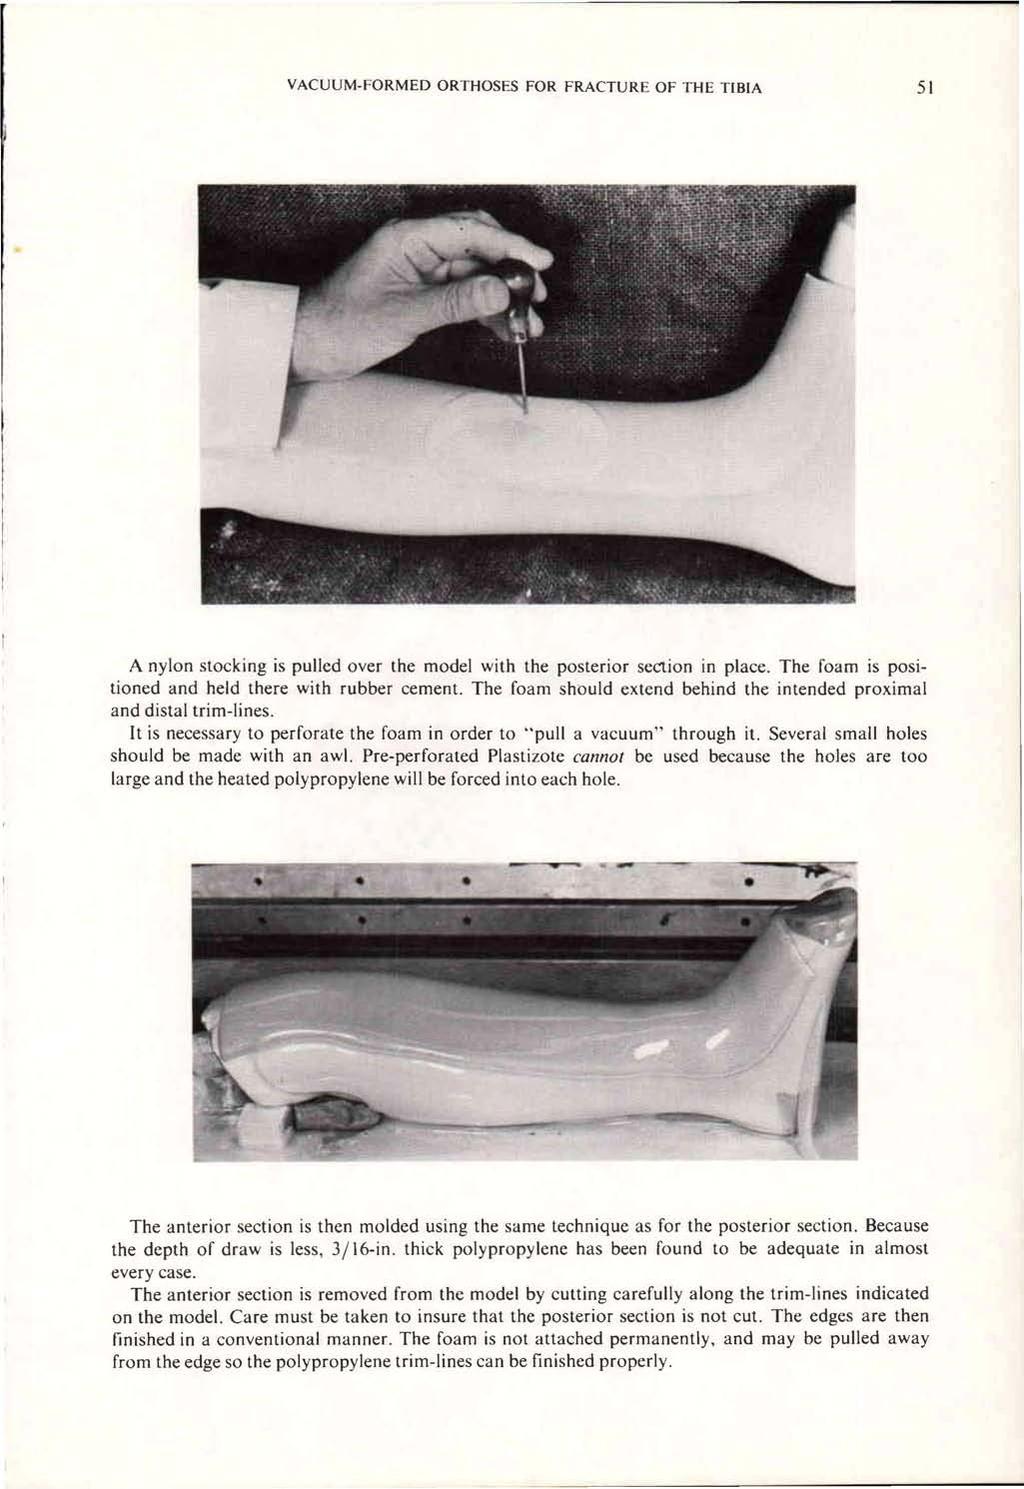 A nylon stocking is pulled over the model with the posterior section in place. The foam is positioned and held there with rubber cement.